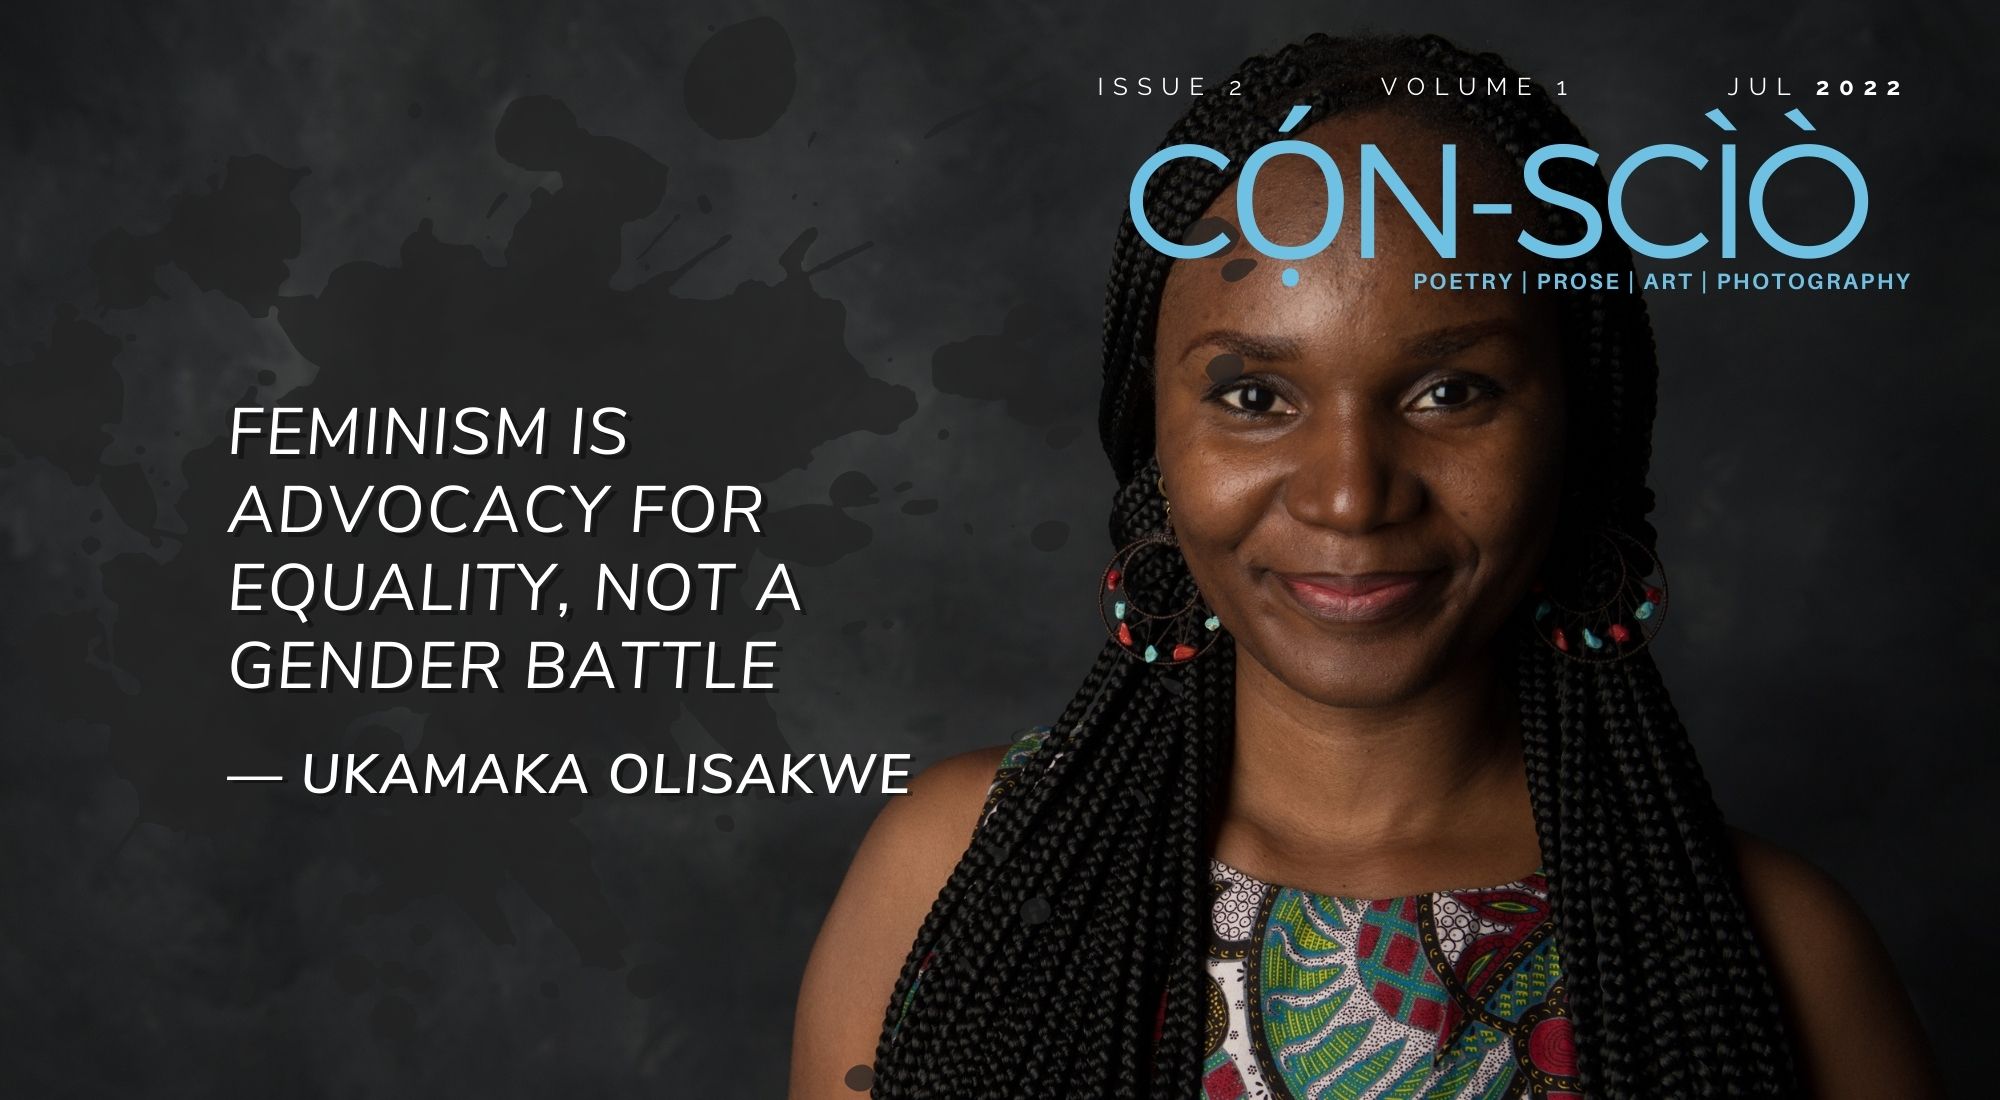 FEMINISM IS ADVOCACY FOR EQUALITY, NOT A GENDER BATTLE:  UKAMAKA OLISAKWE TALKS FEMINISM & RELATED THEMES IN OGADINMA WITH CỌ́N-SCÌÒ MAGAZINE